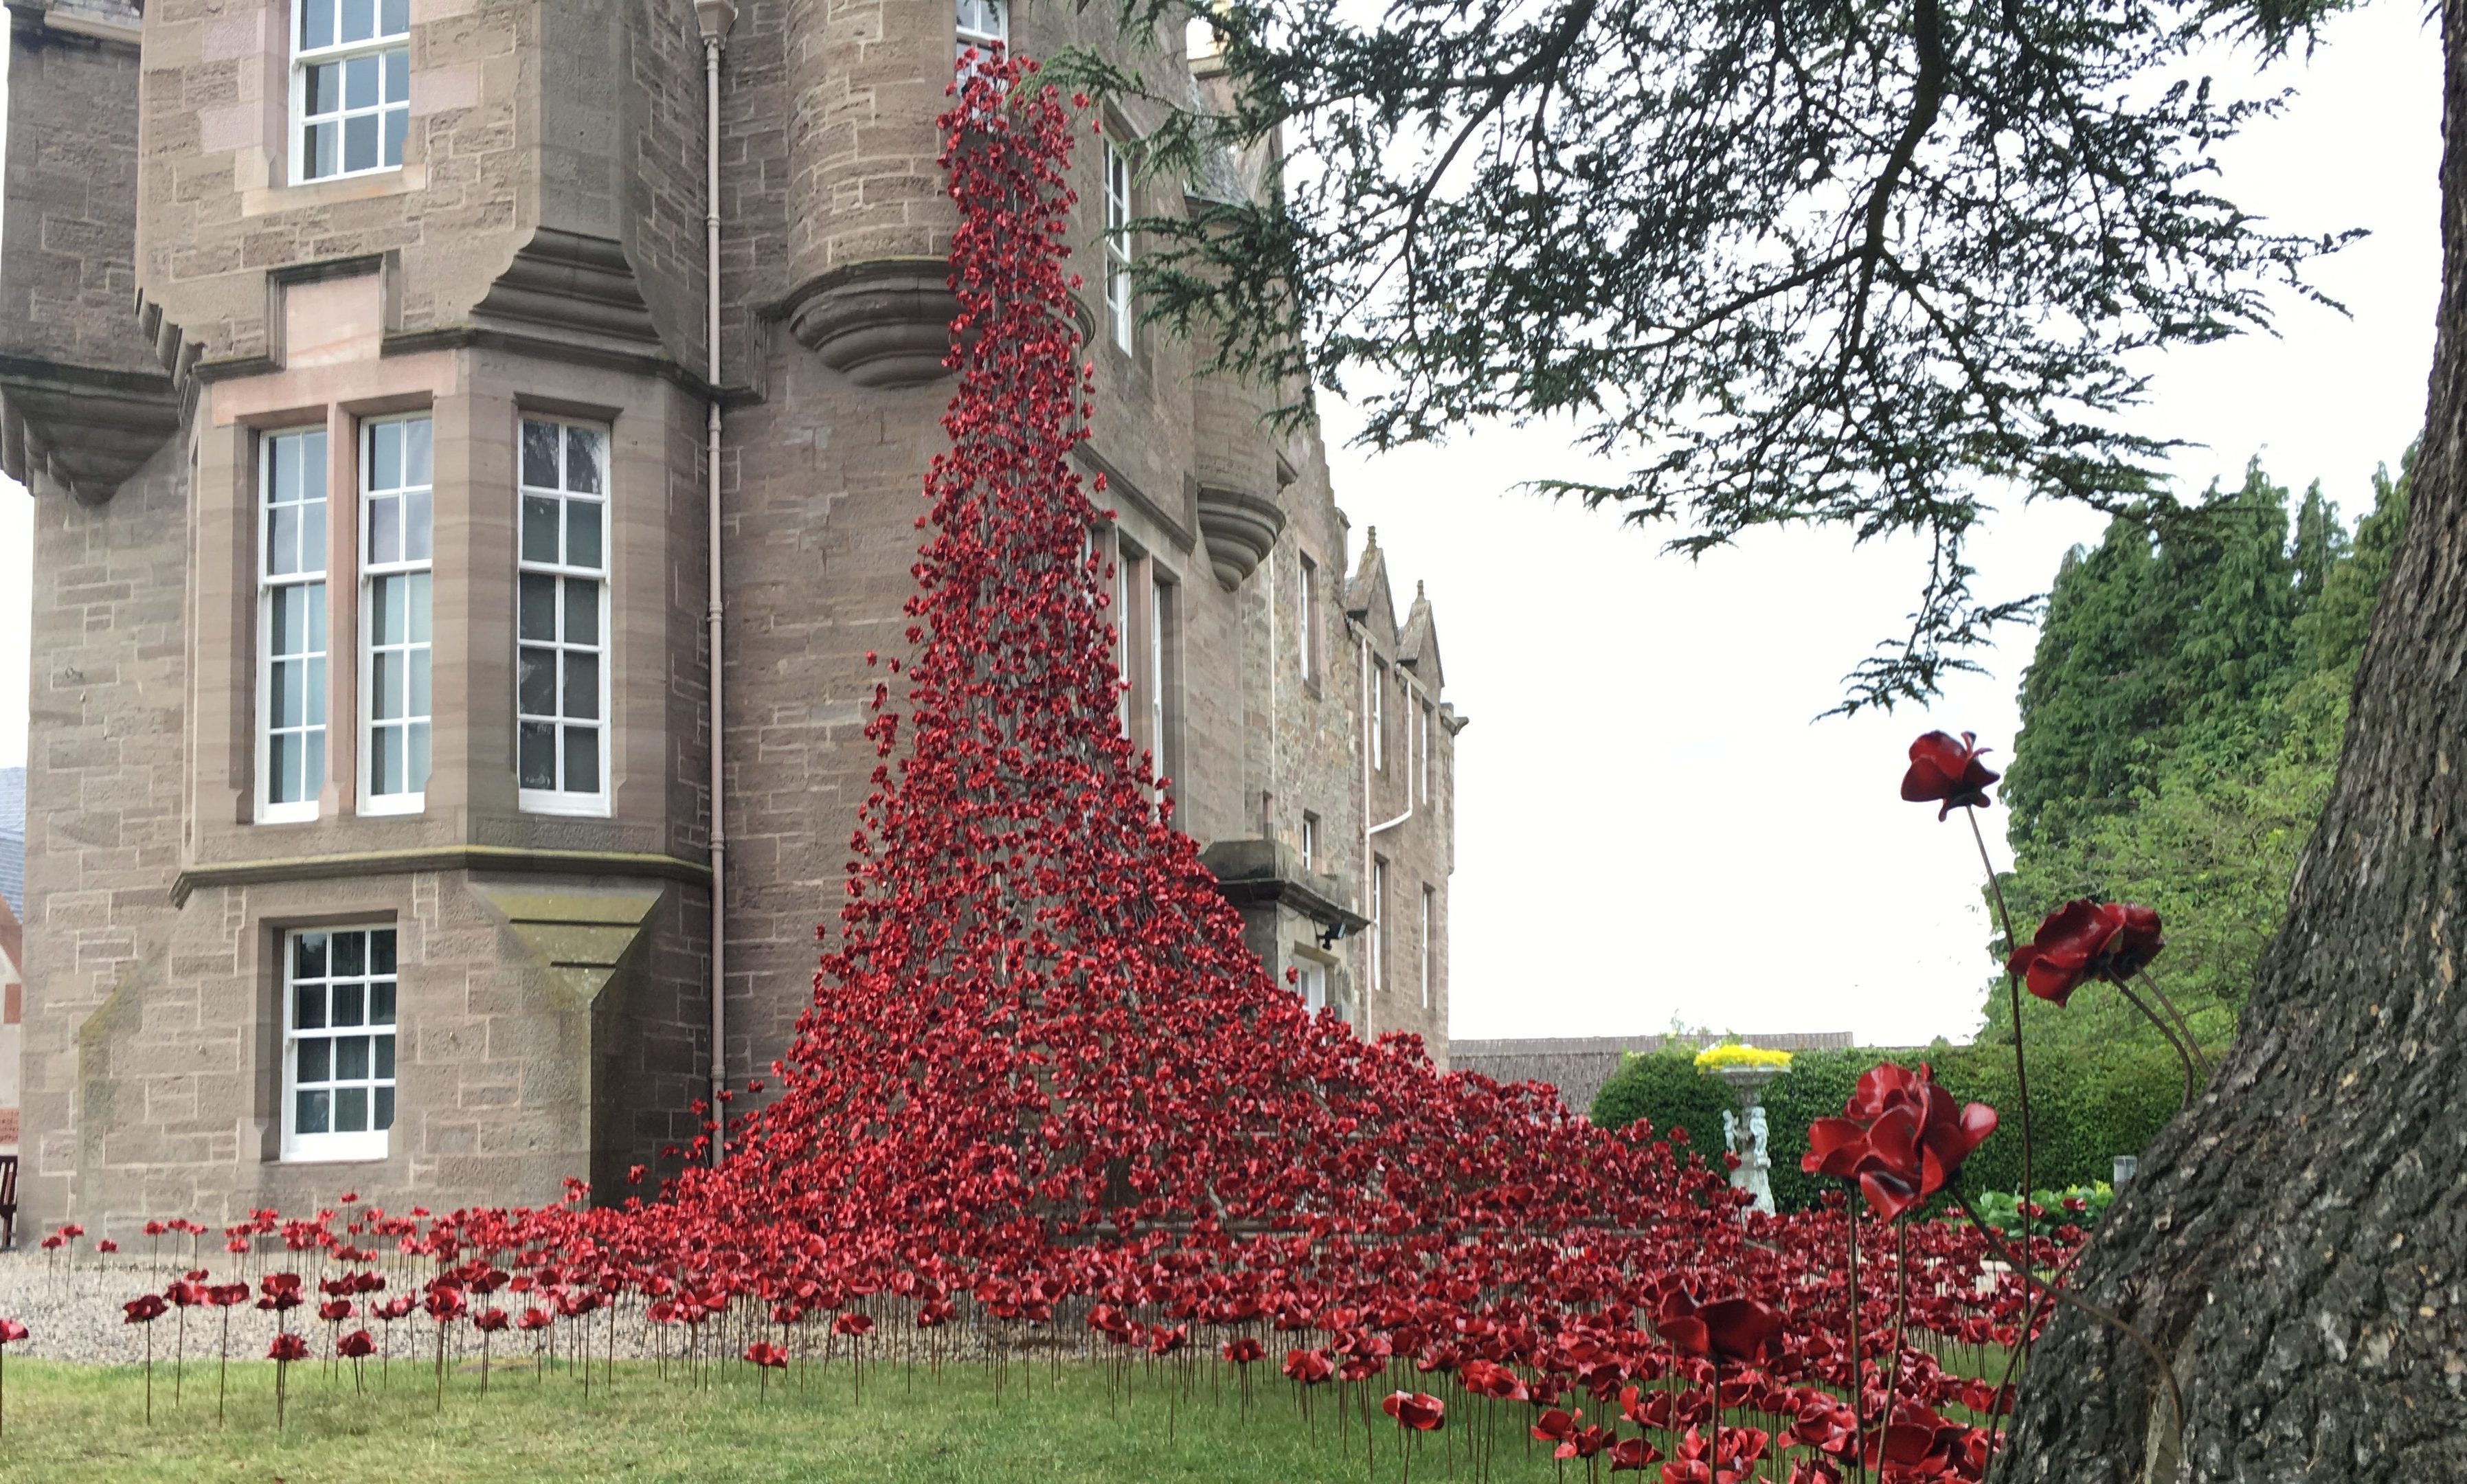 The poppies at Balhousie Castle. The one-off event contributed to a bumper year for tourism in Perth and Kinross.